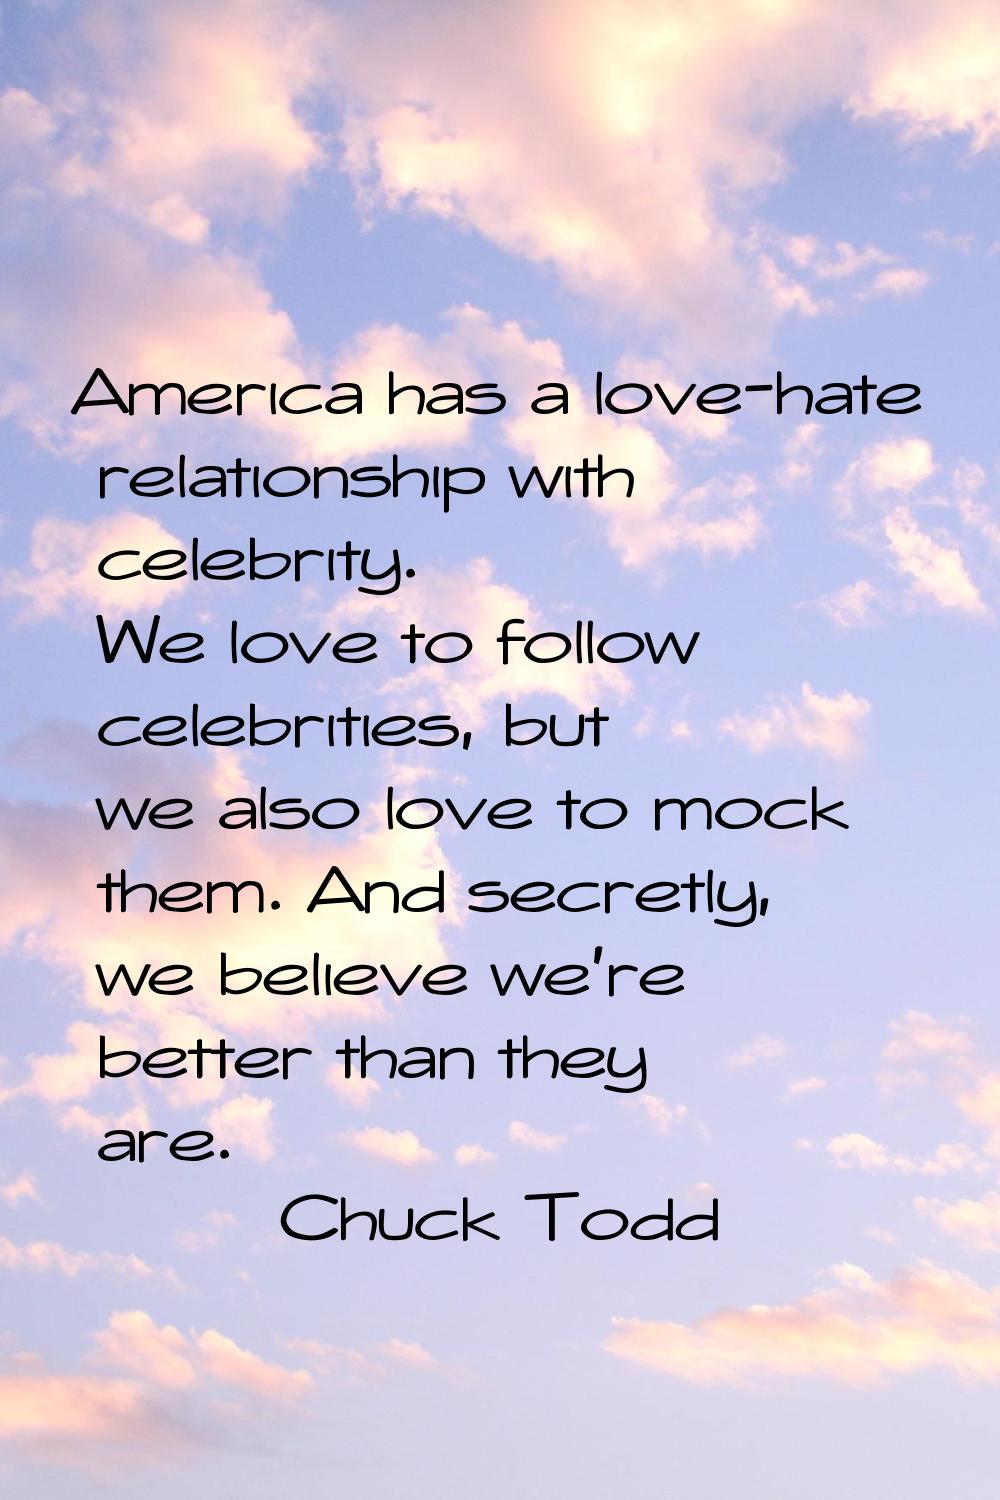 America has a love-hate relationship with celebrity. We love to follow celebrities, but we also lov